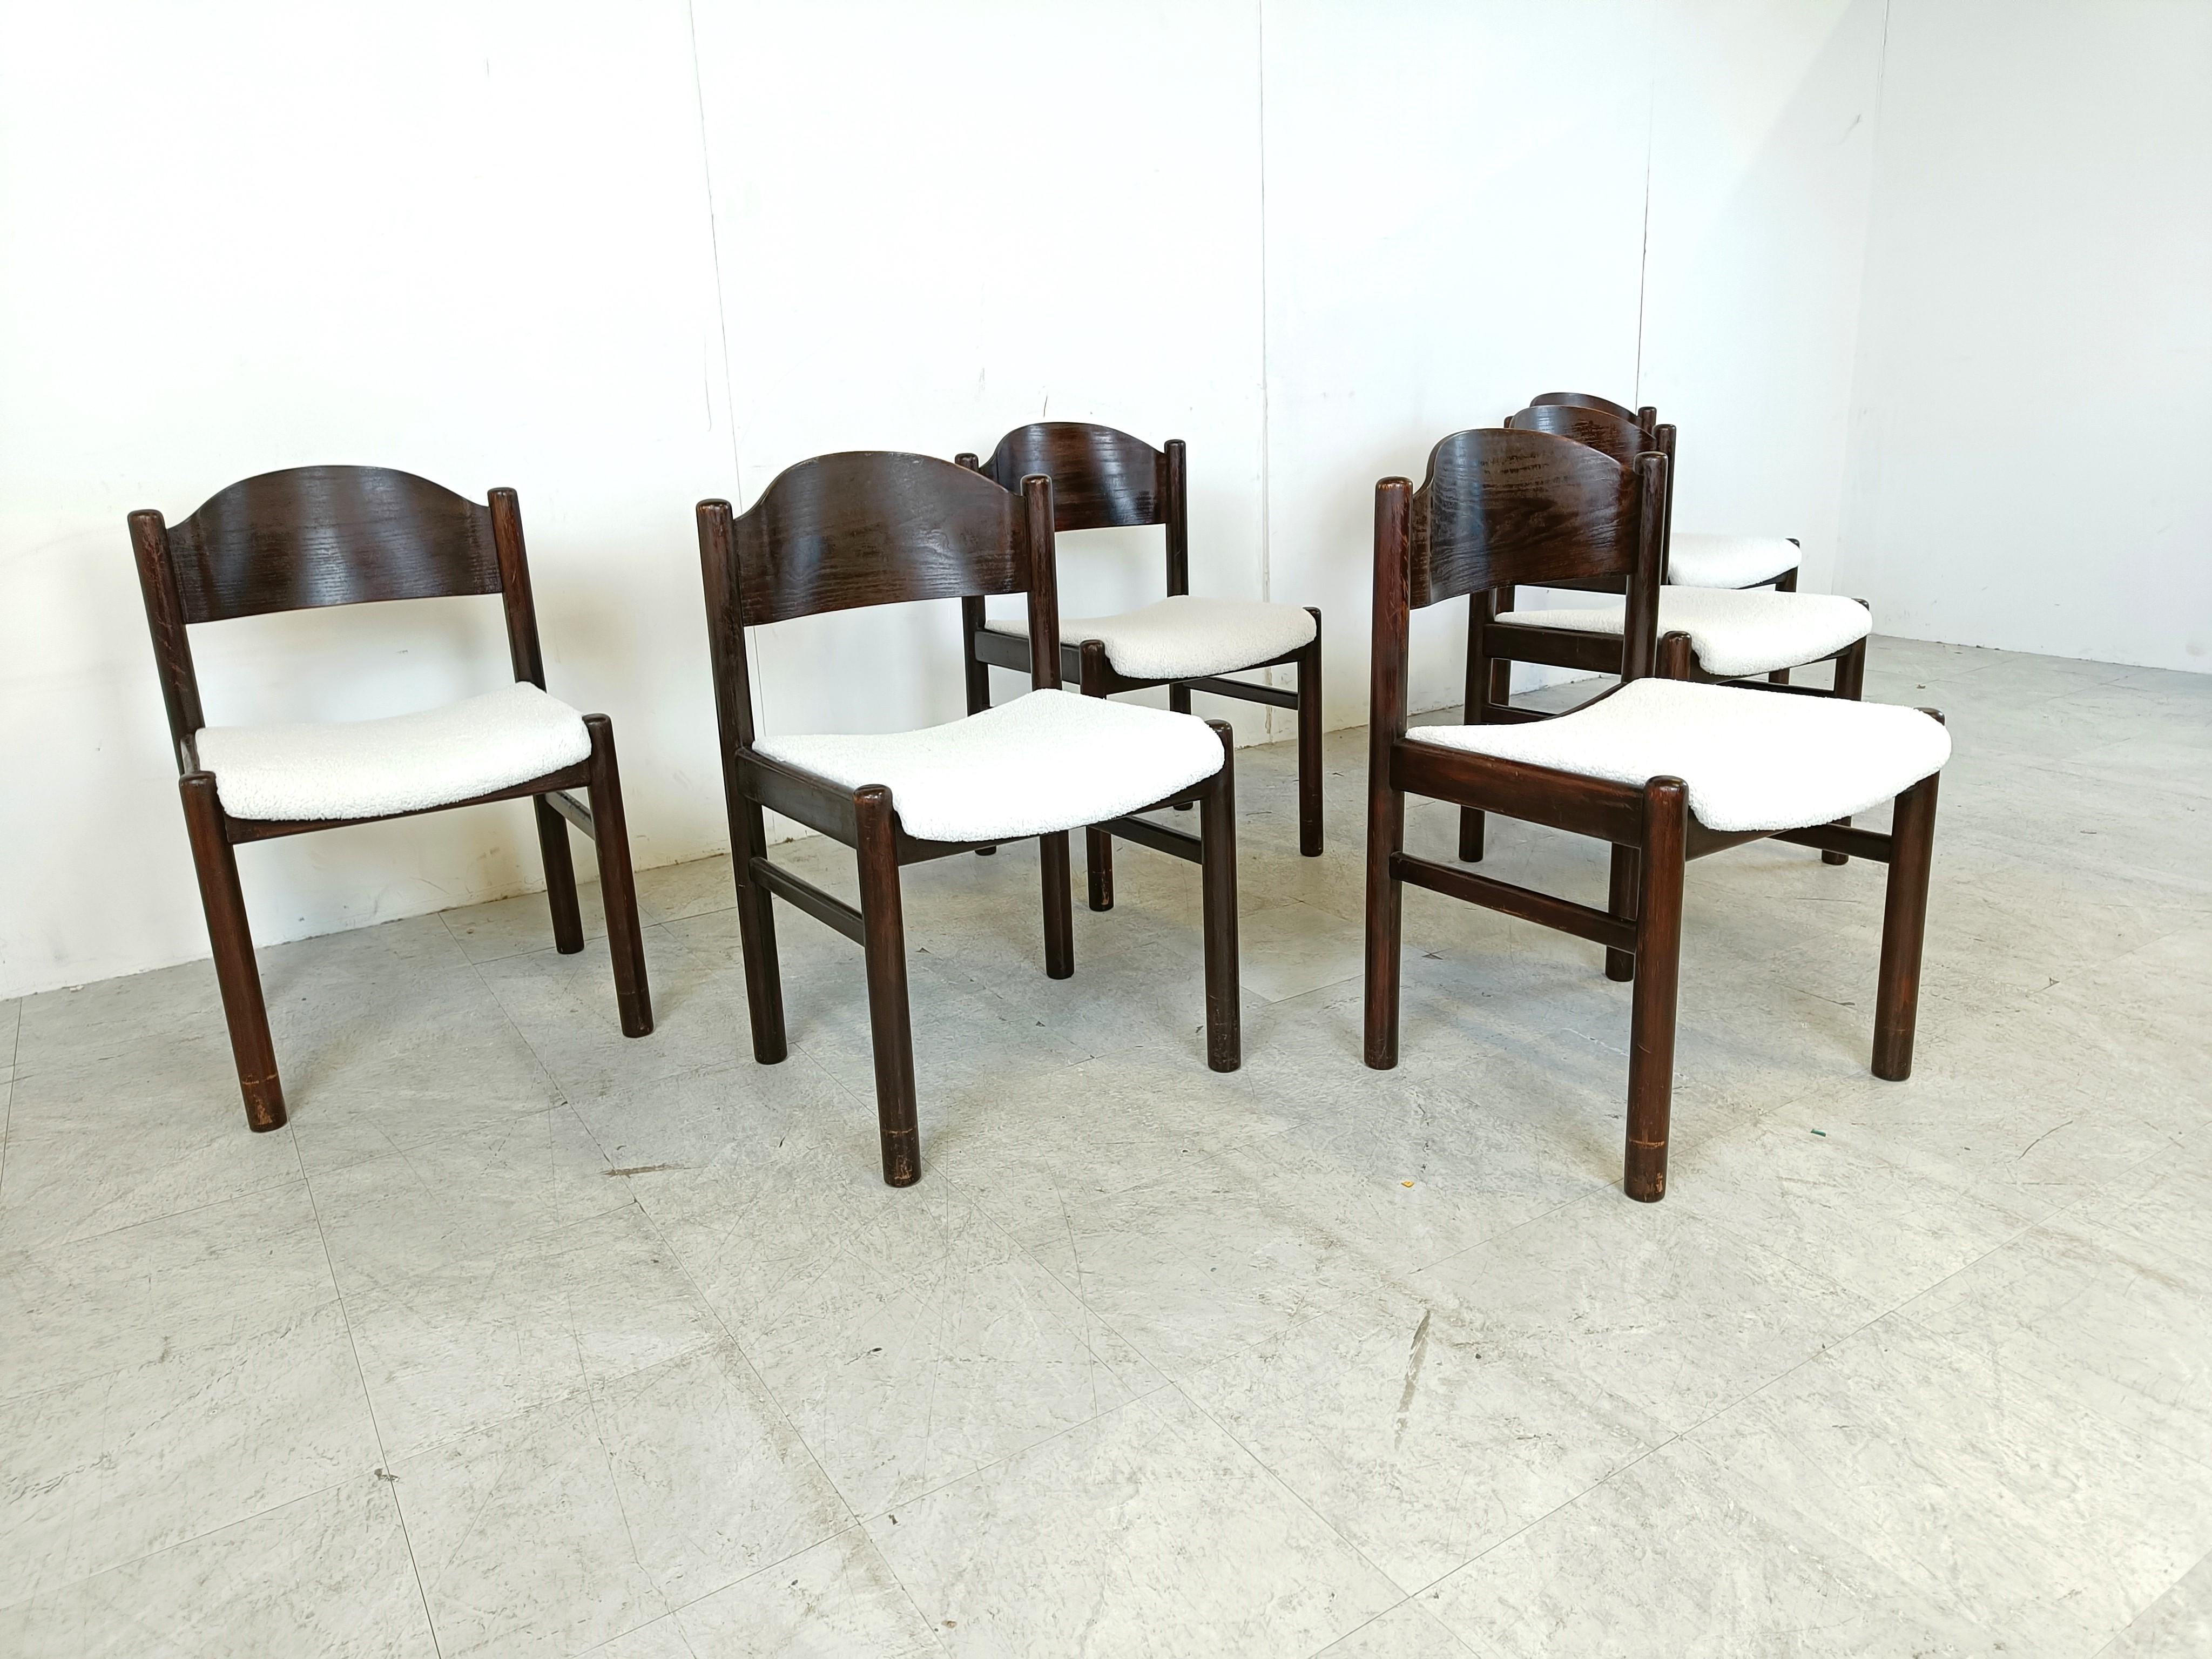 Vintage brutalist dining chairs, set of 6 - 1960s 3